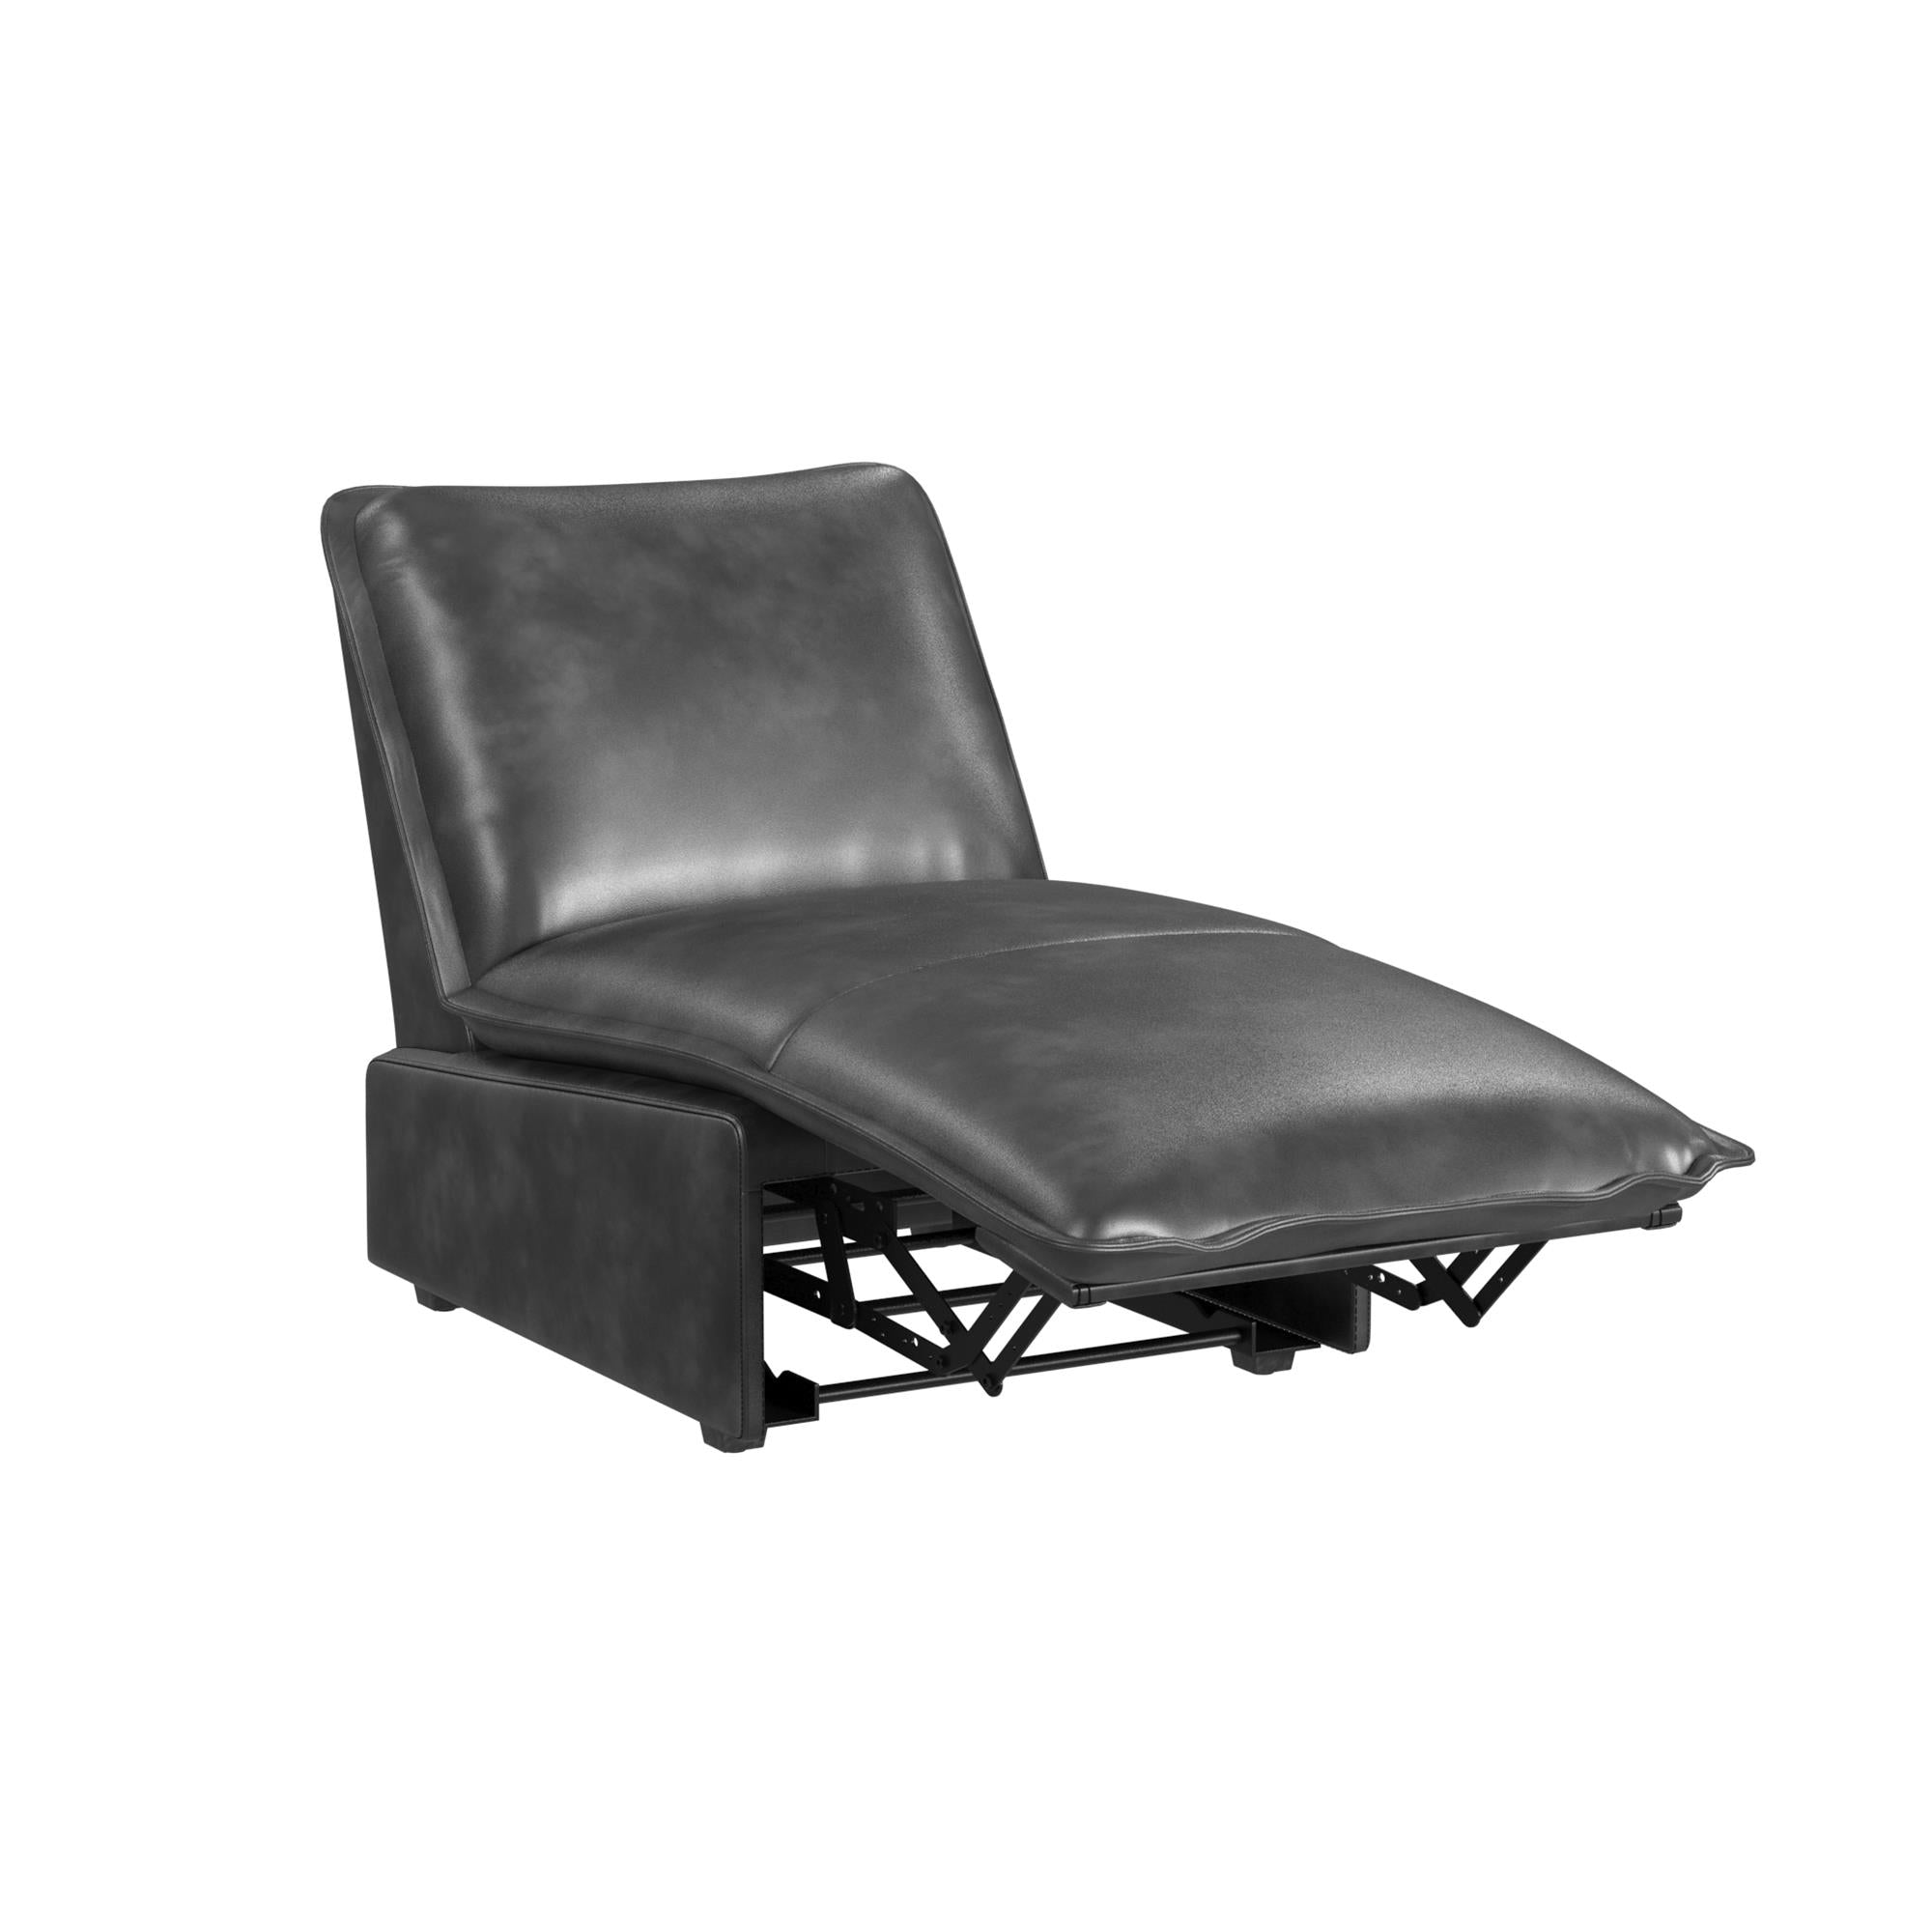 Uptown Gotham Power Motion Recliner, Charcoal - Charcoal